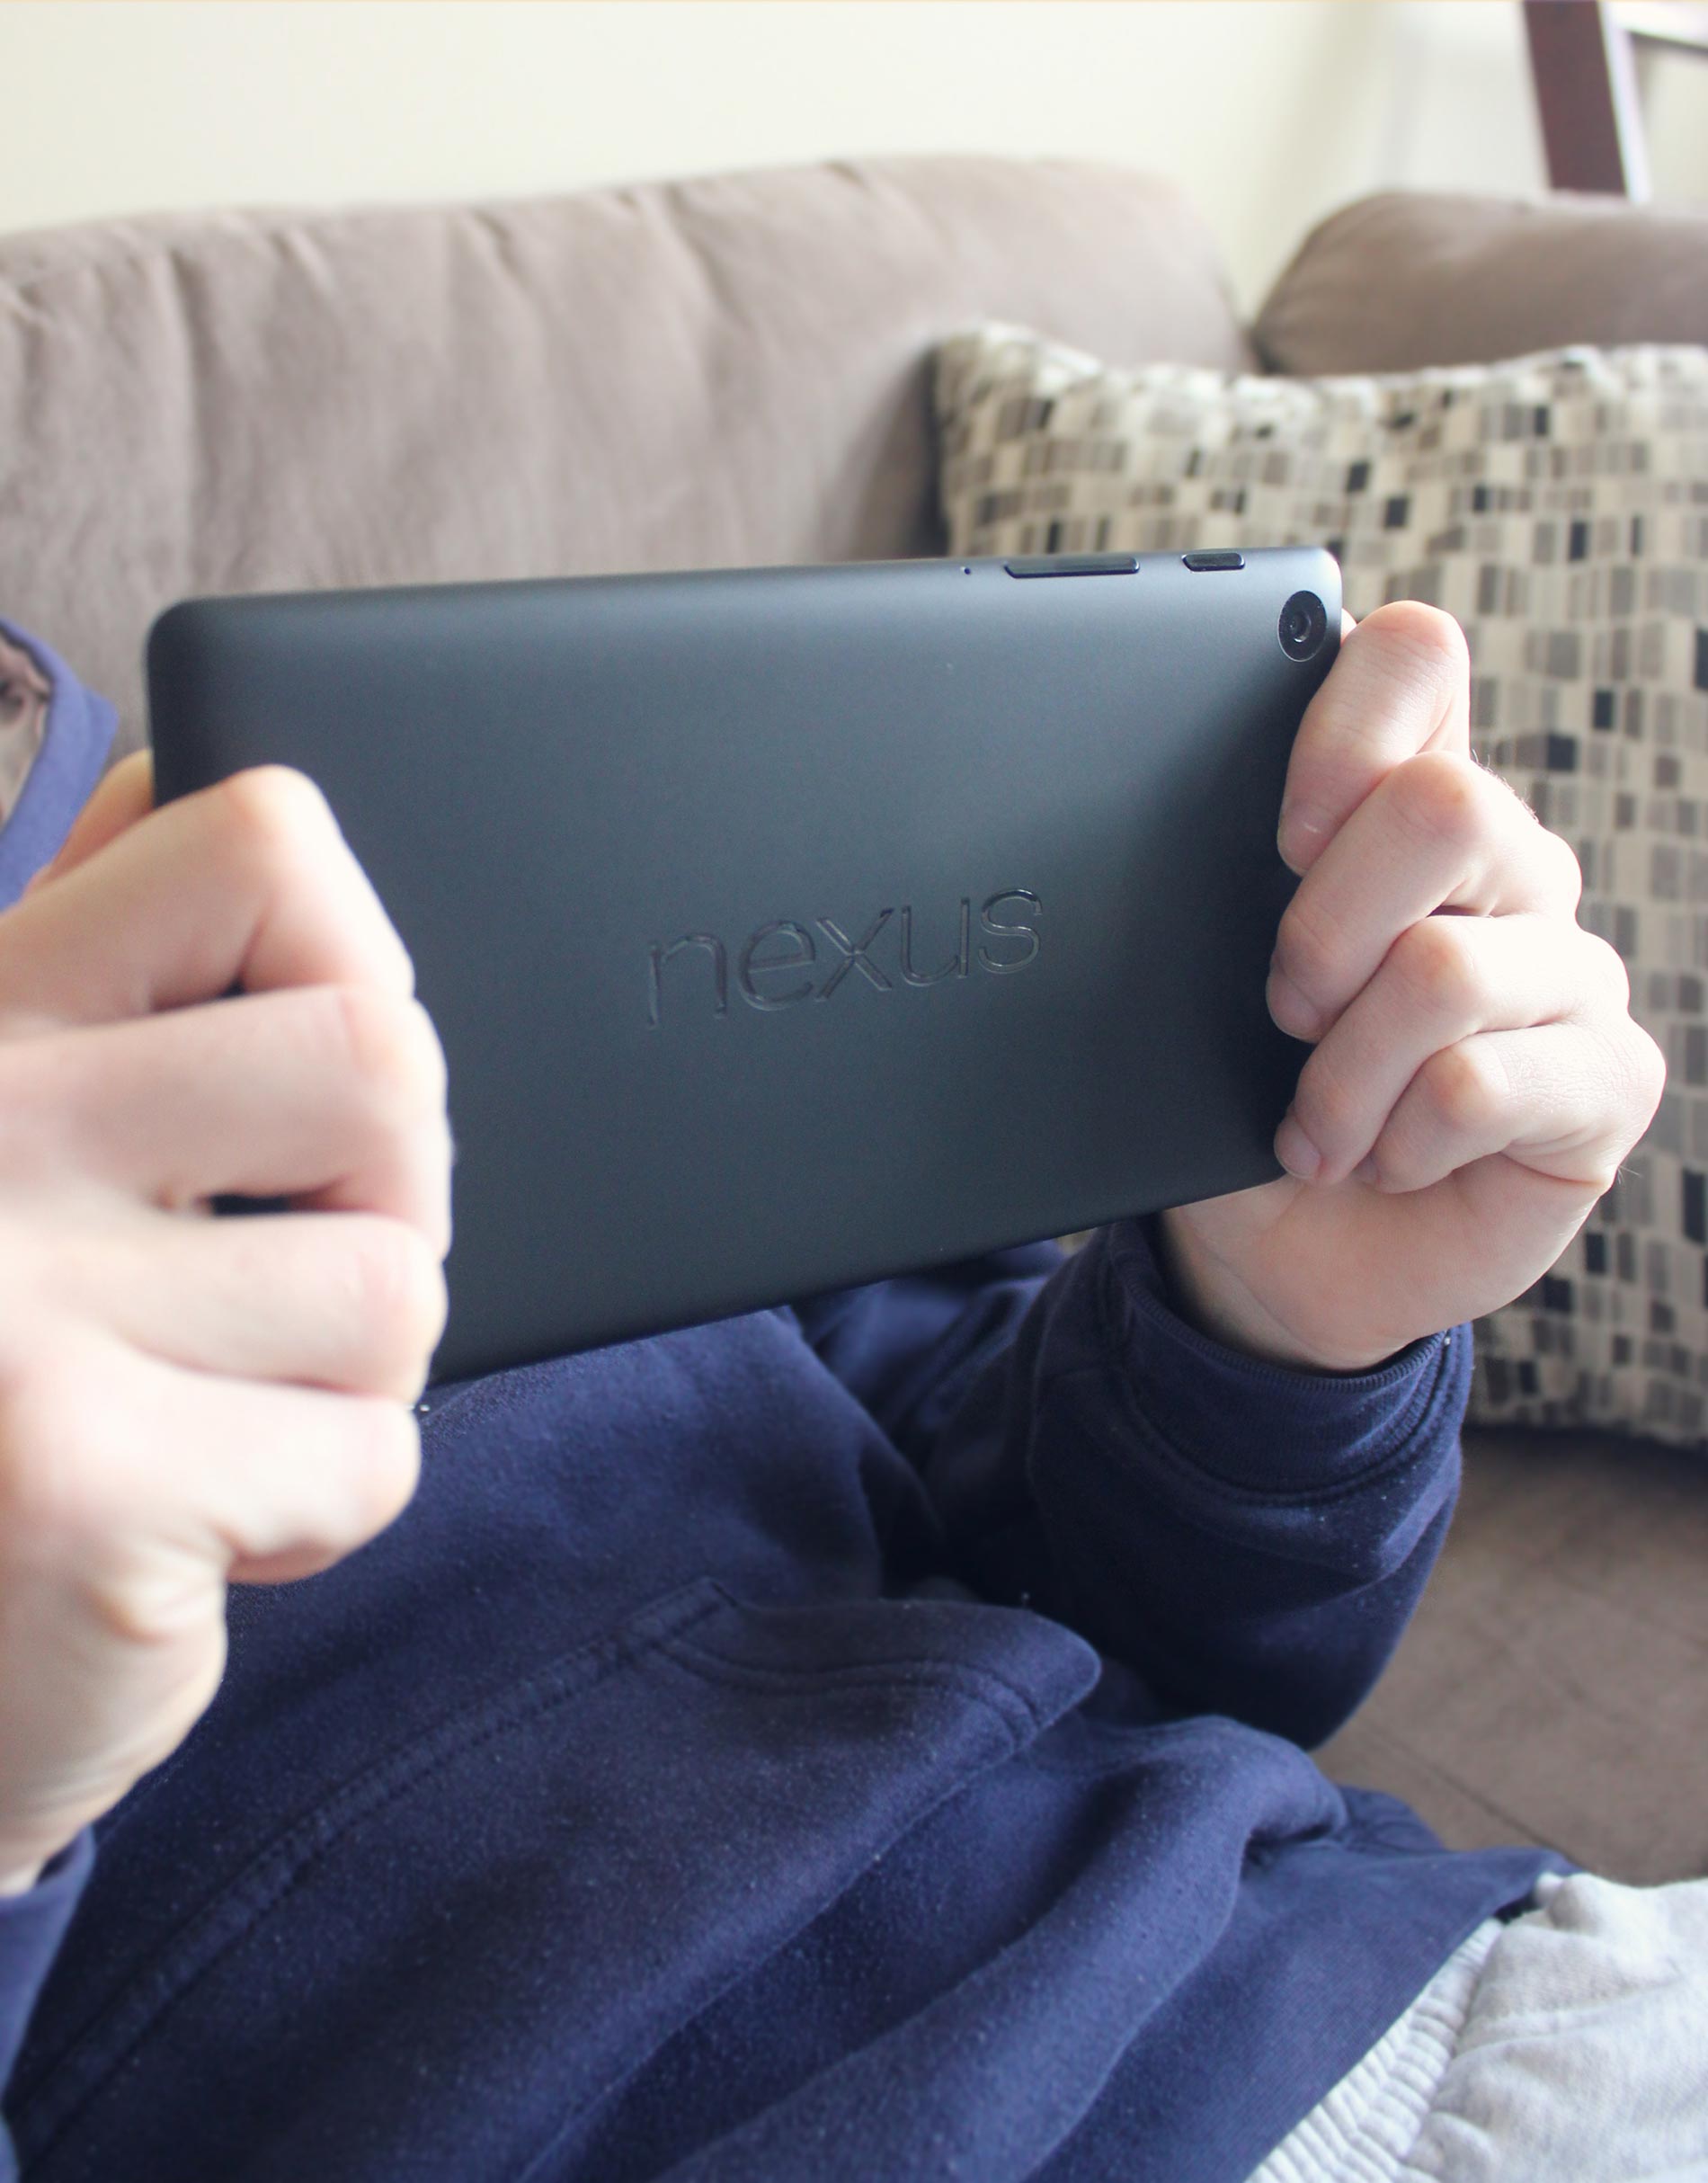 Making Everyday Life Easier with the Google Nexus 7 Tablet